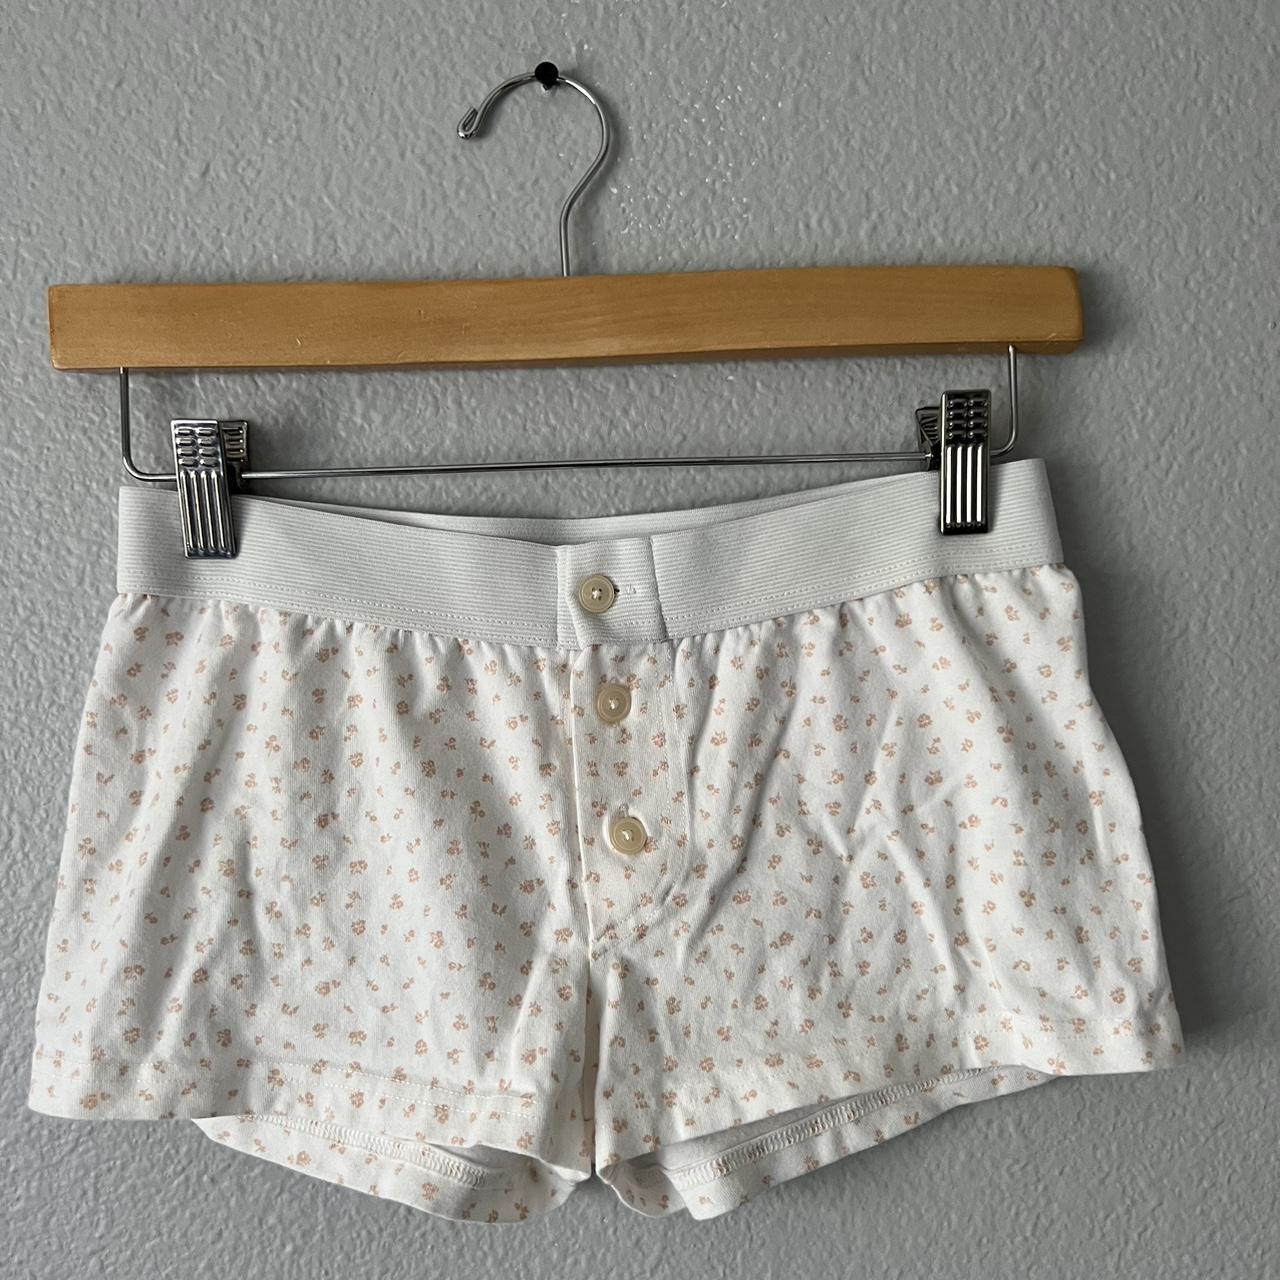 Brandy Melville Women's White and Pink Shorts